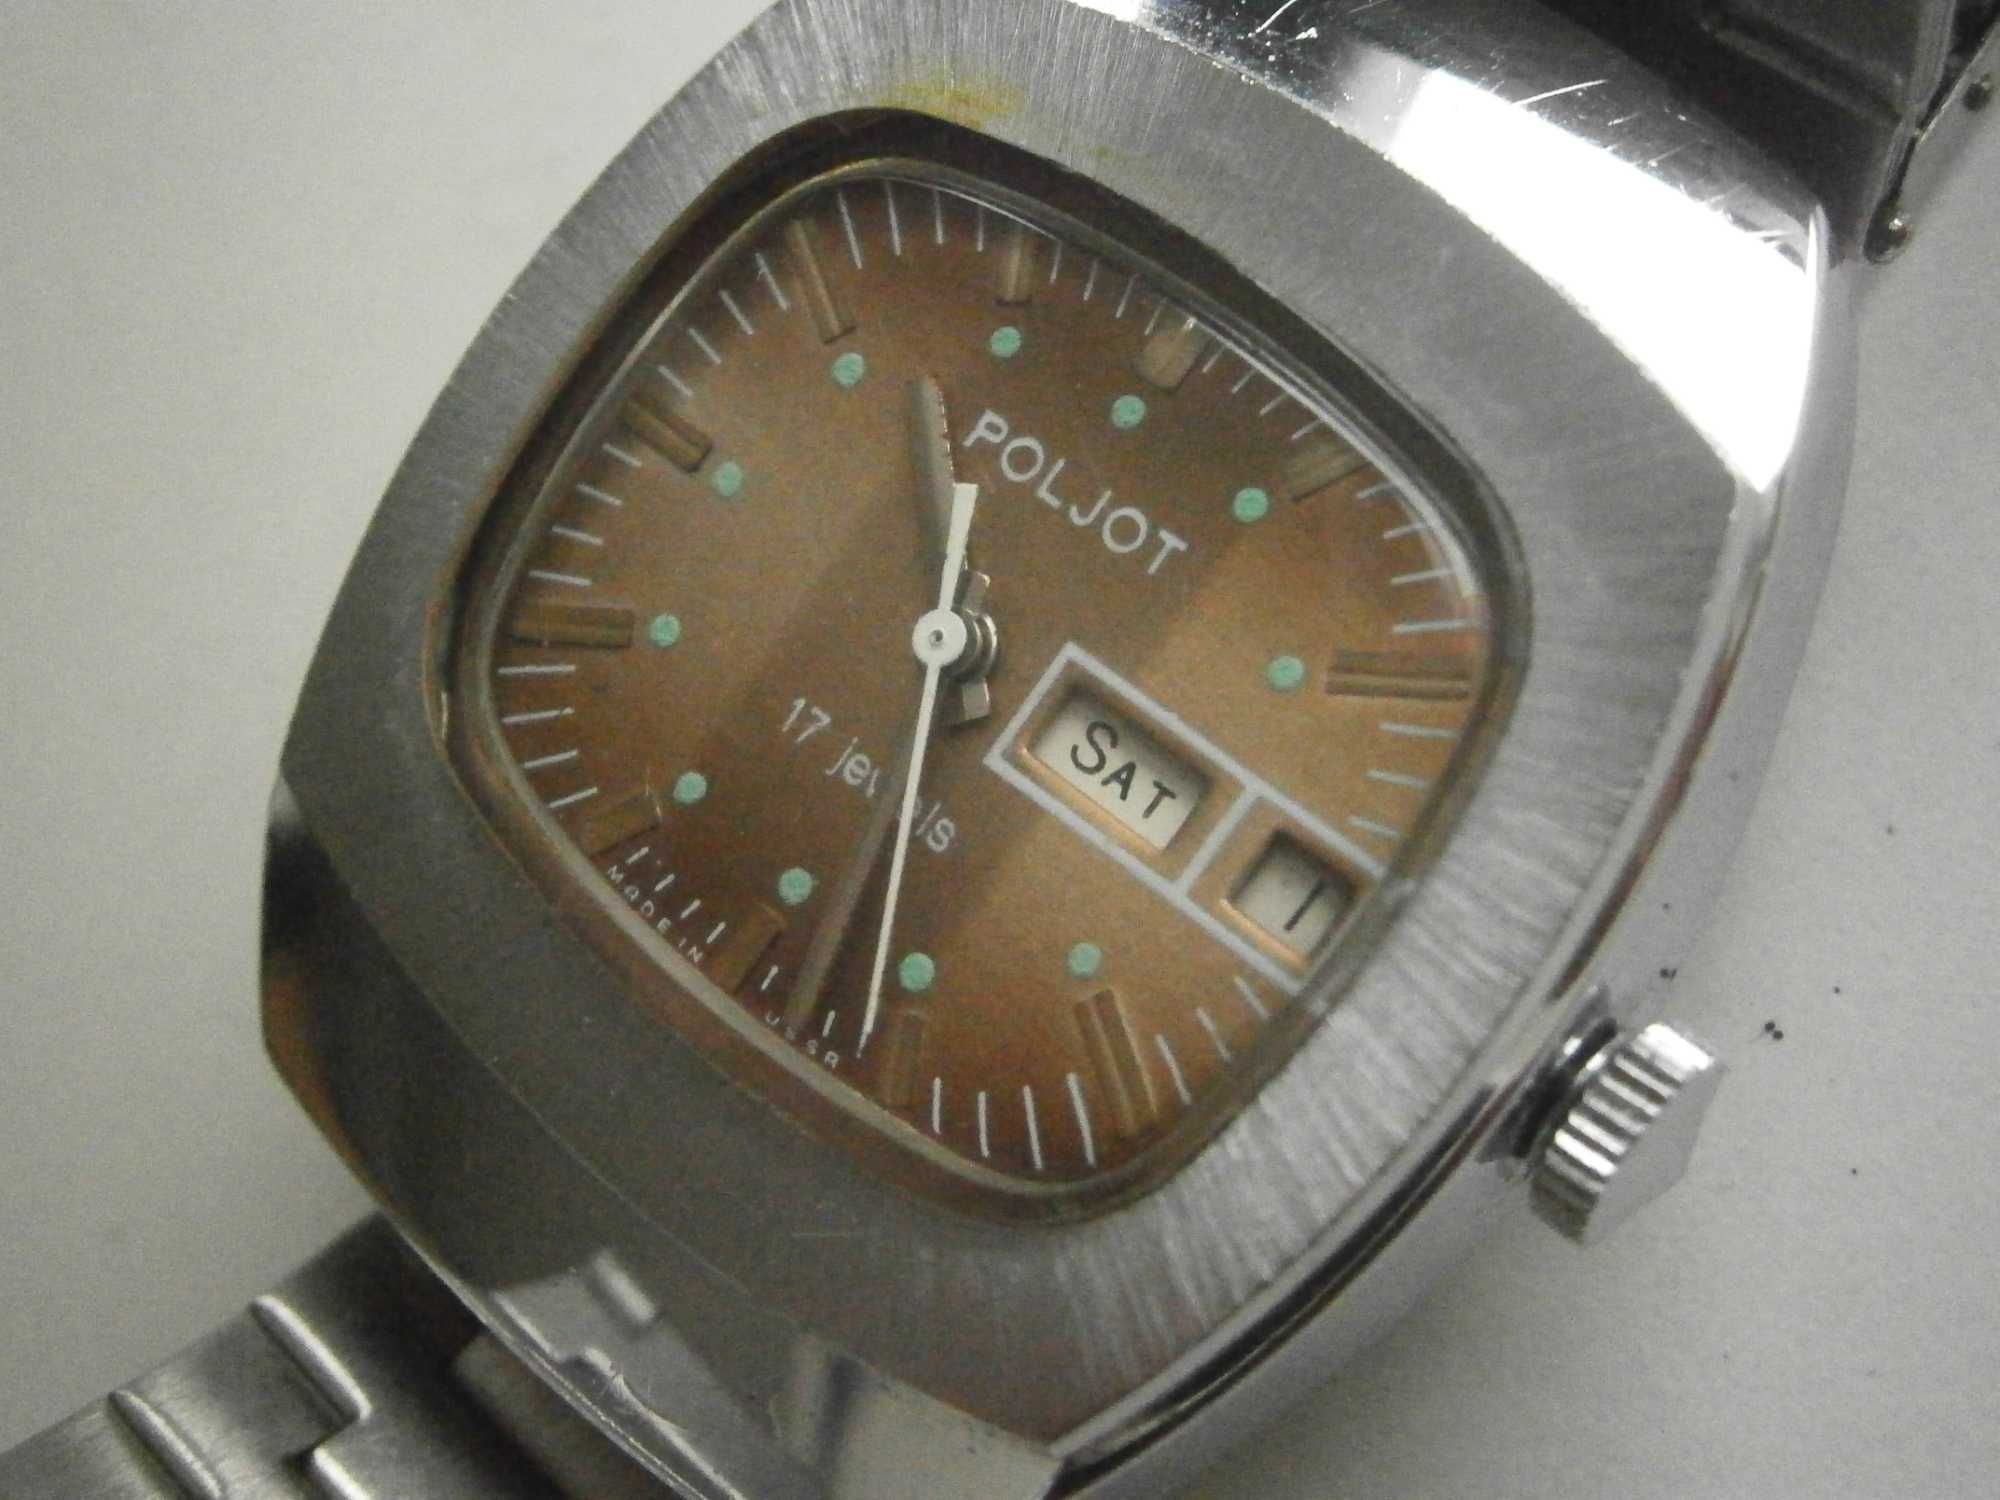 POLJOT, 23 jewels, made in USSR, day-date quickset!